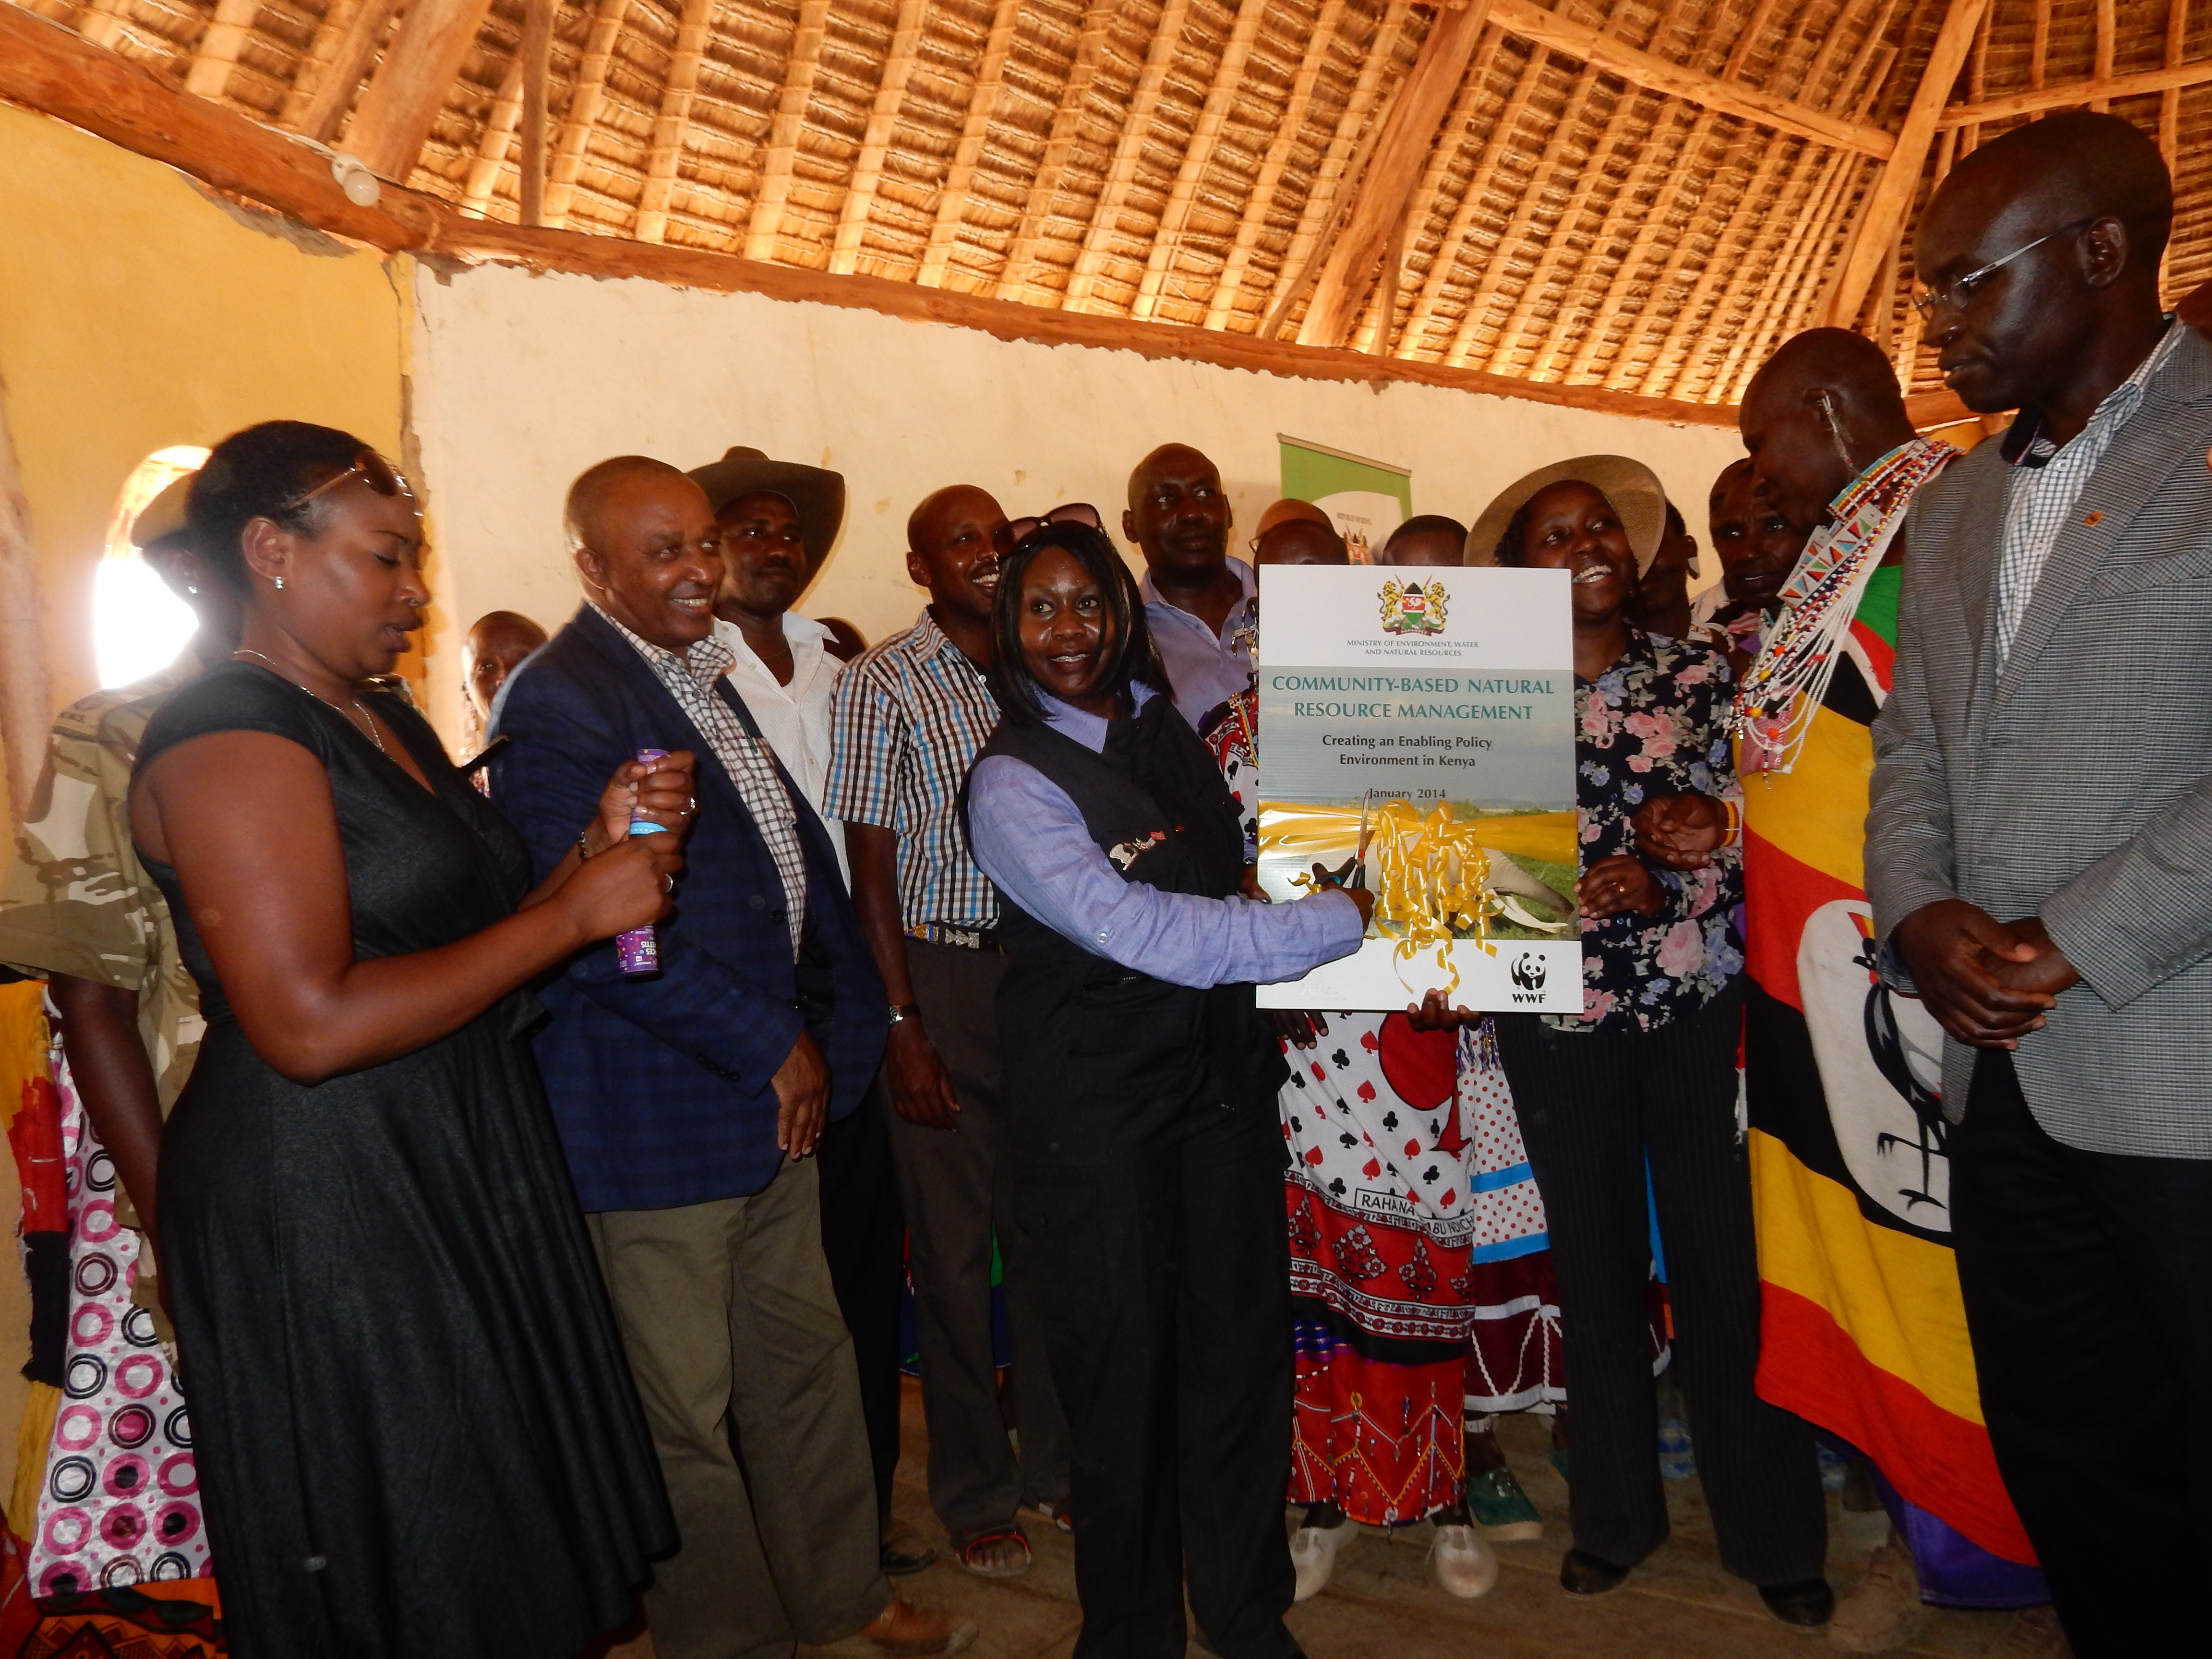 Community Based Natural Resource Management Publication Launched